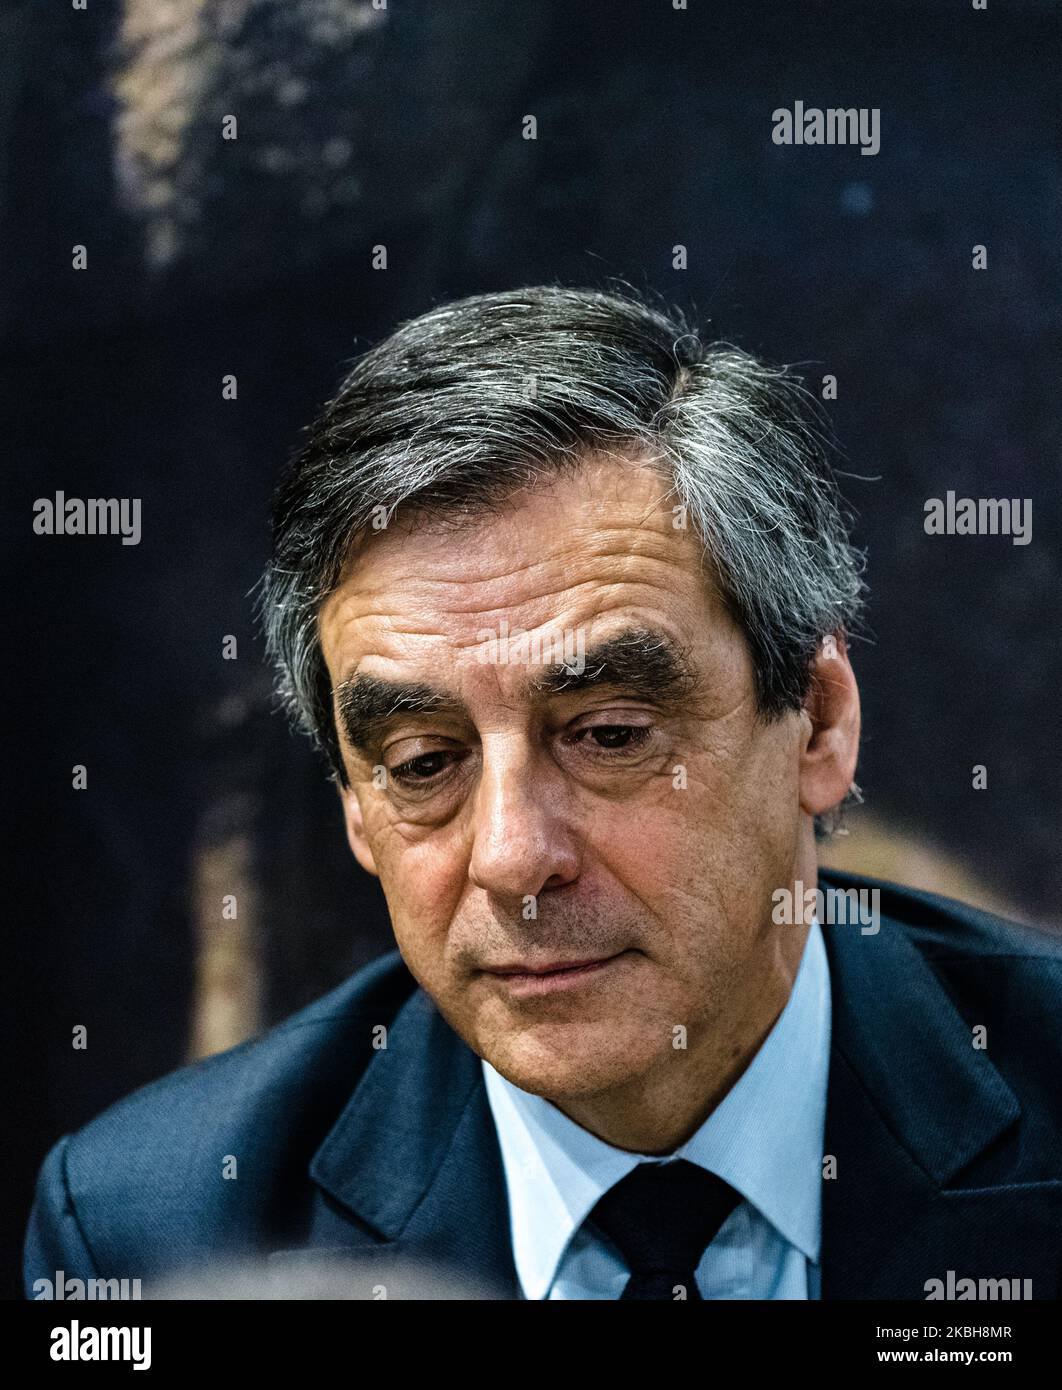 Portrait of François Fillon during his visit to the 2017 Salon de l'Agriculture on March 1, 2017, when the trial of François Fillon and Pénélope Fillon for 'fictitious employment' and embezzlement of funds at the Paris Tribunal de Grande Instance for the so-called Penelope Gate case opened on February 24, 2020. This is a look back at the campaign of Les Républicains (LR) party candidate François Fillon for the 2017 presidential election during which the case was revealed. (Photo by Samuel Boivin/NurPhoto) Stock Photo